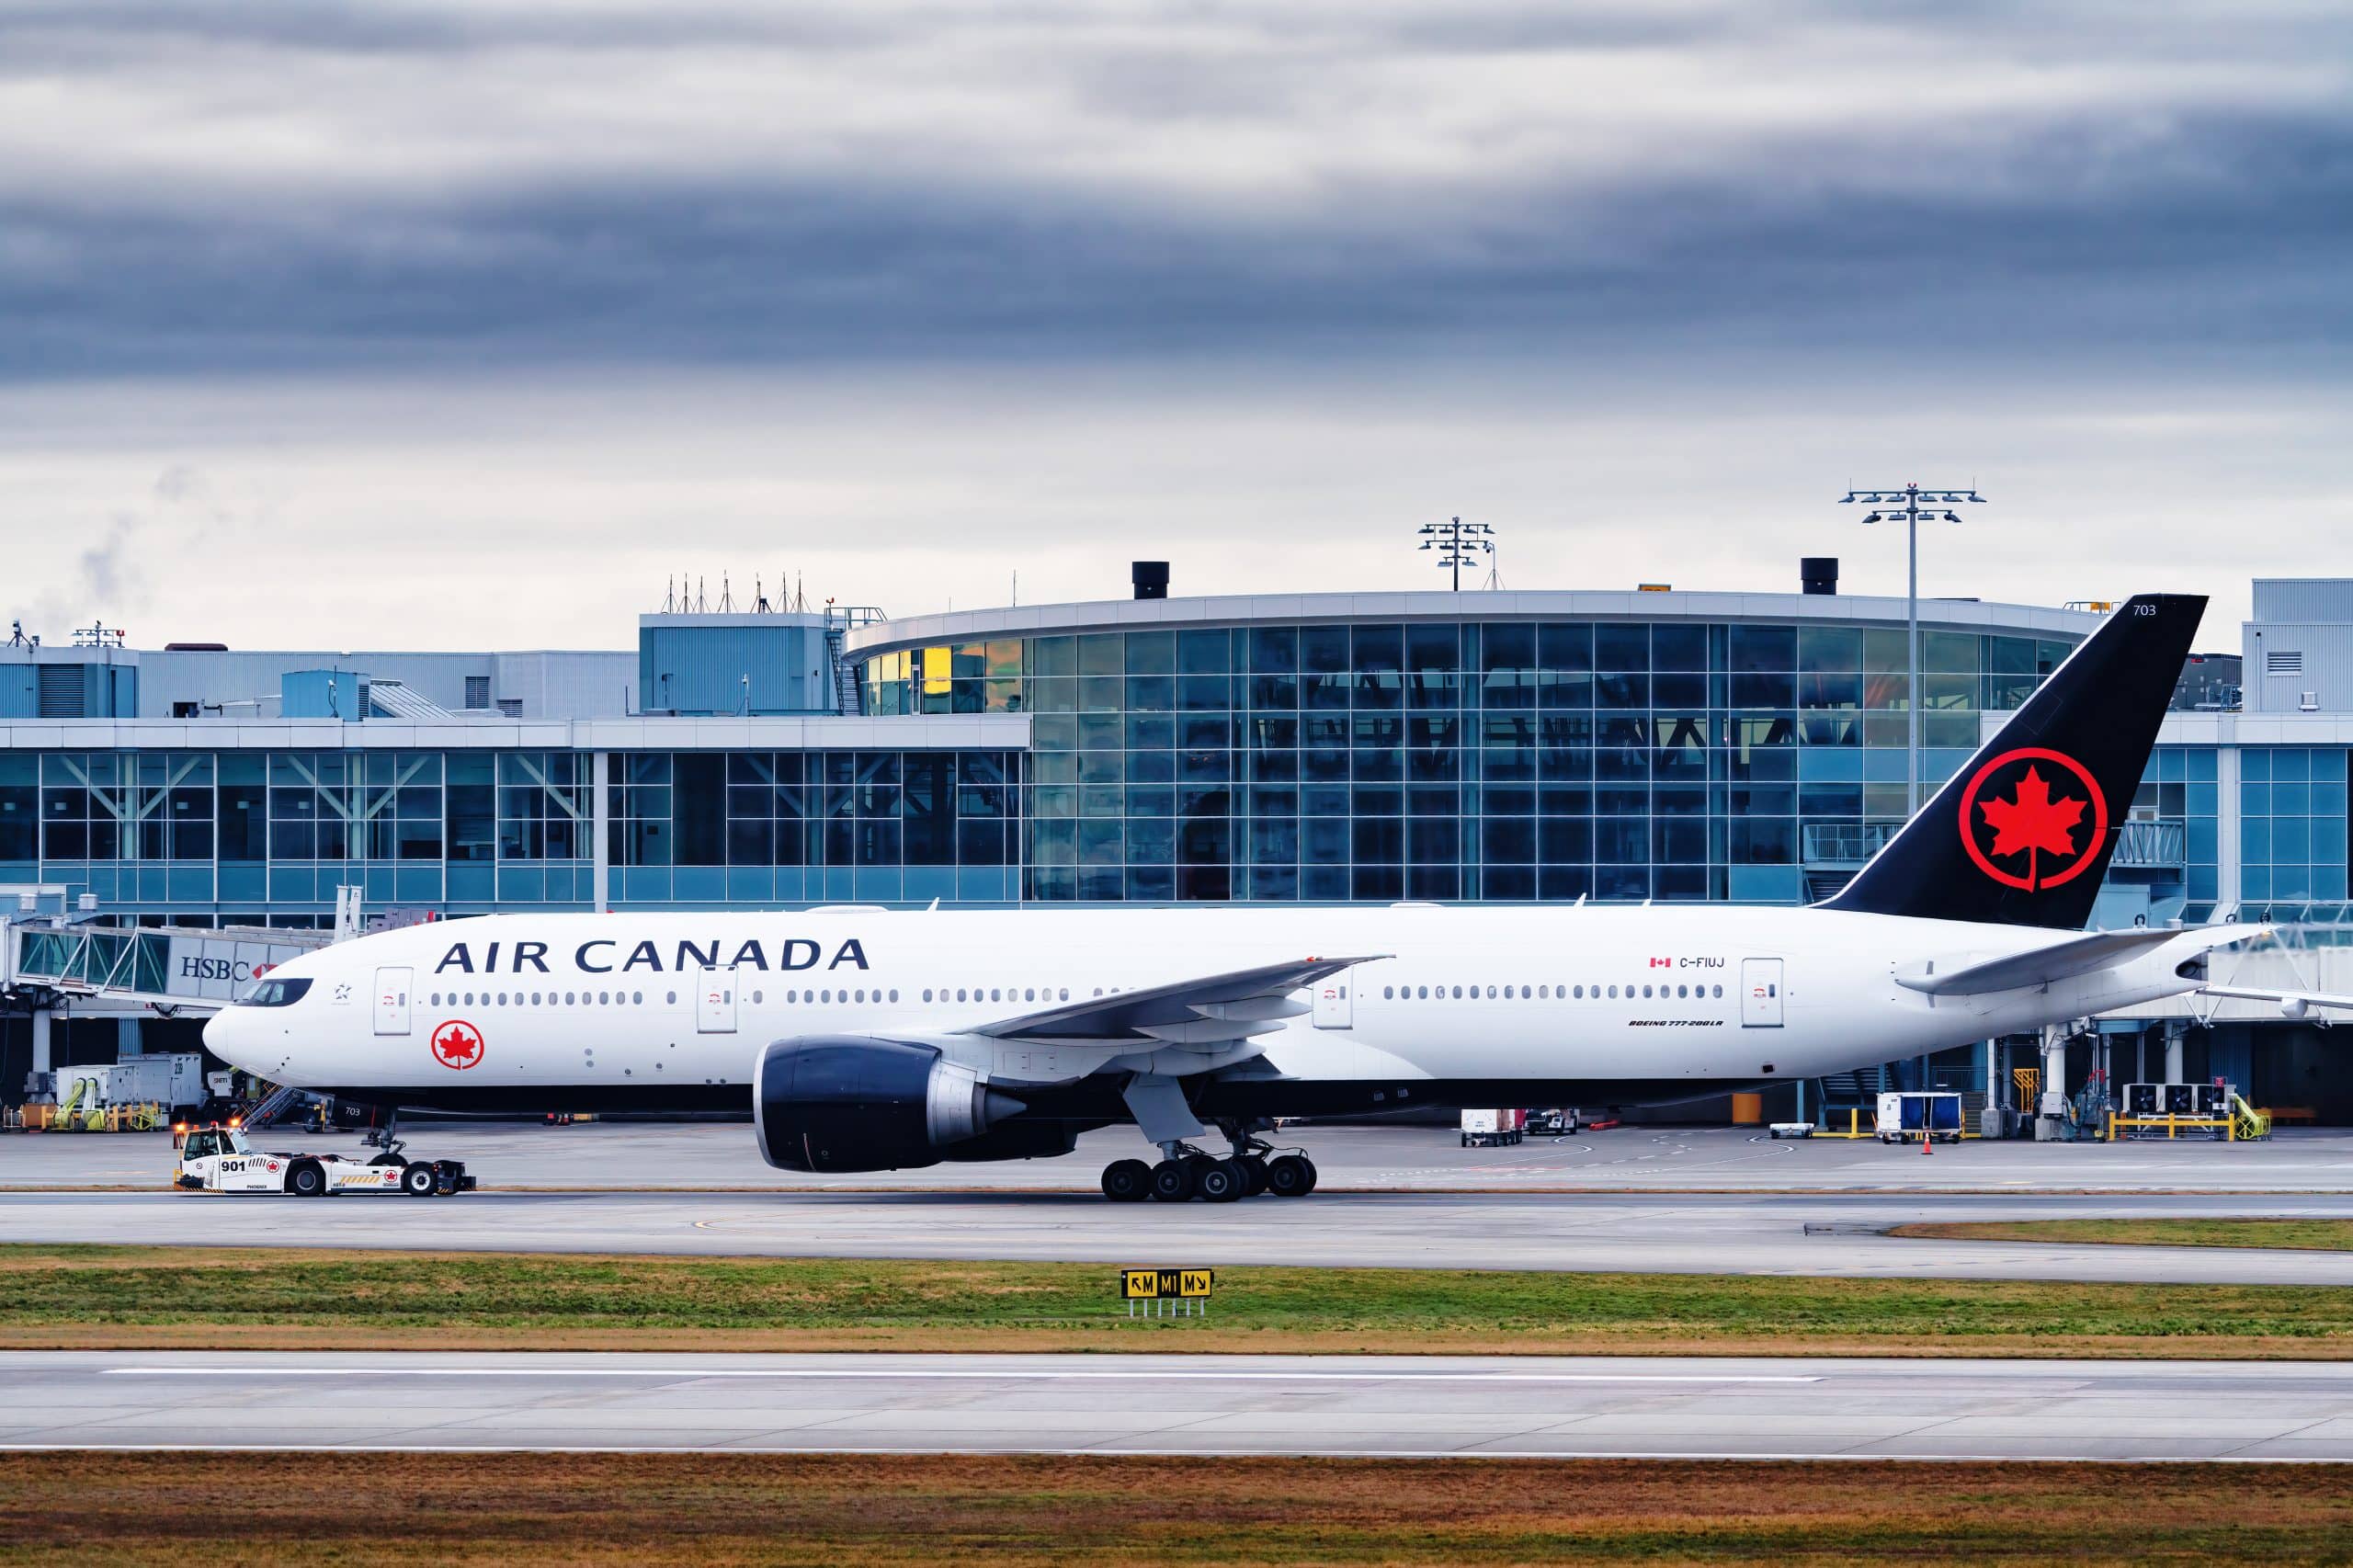 Air Canada 77L Yvr Ground Tow Scaled 